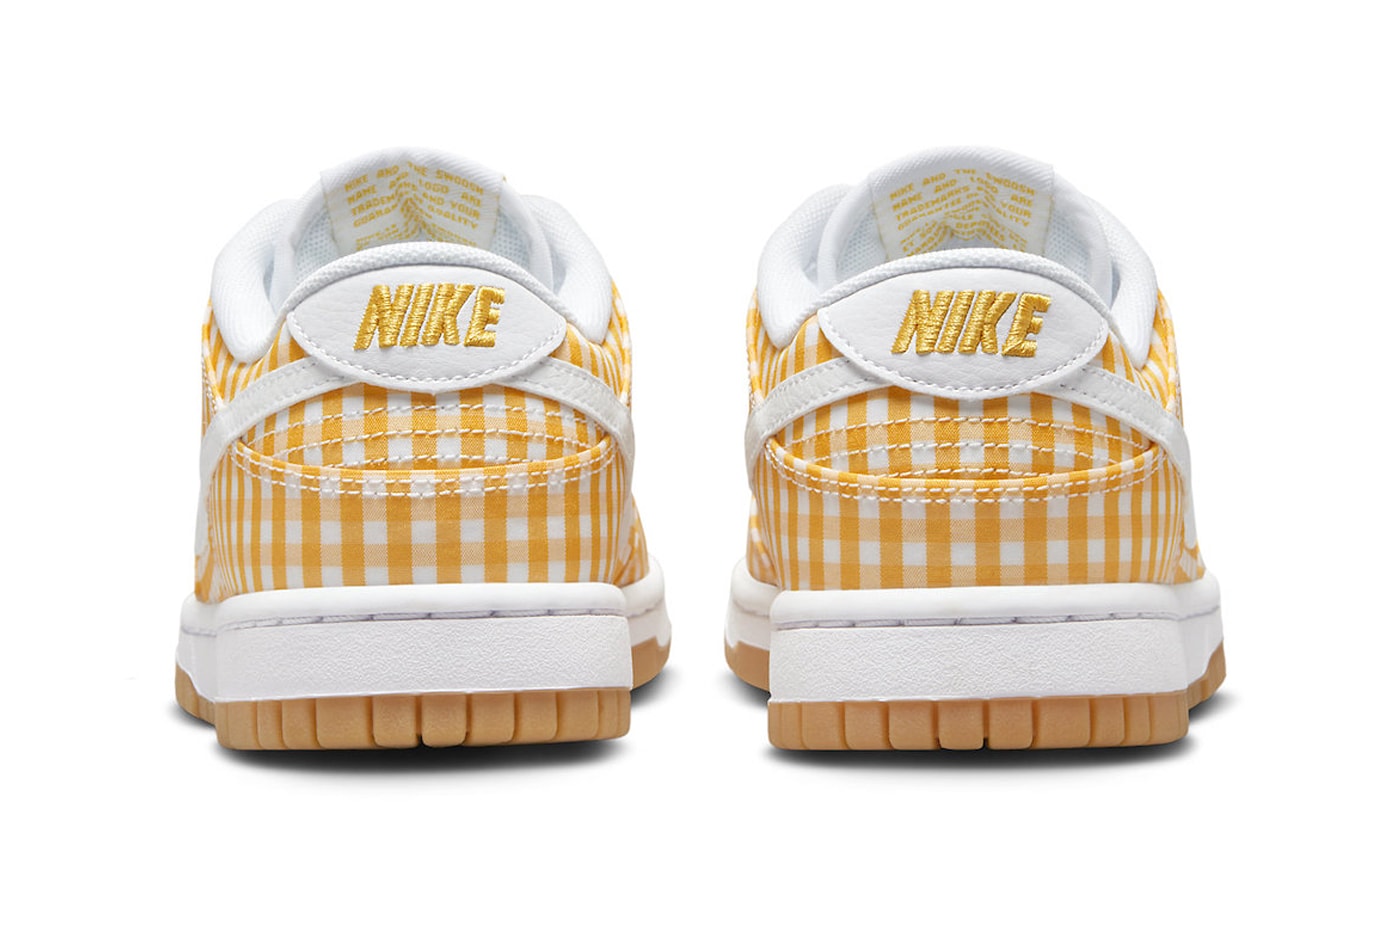 nike dunk low yellow gingham sneaker release details